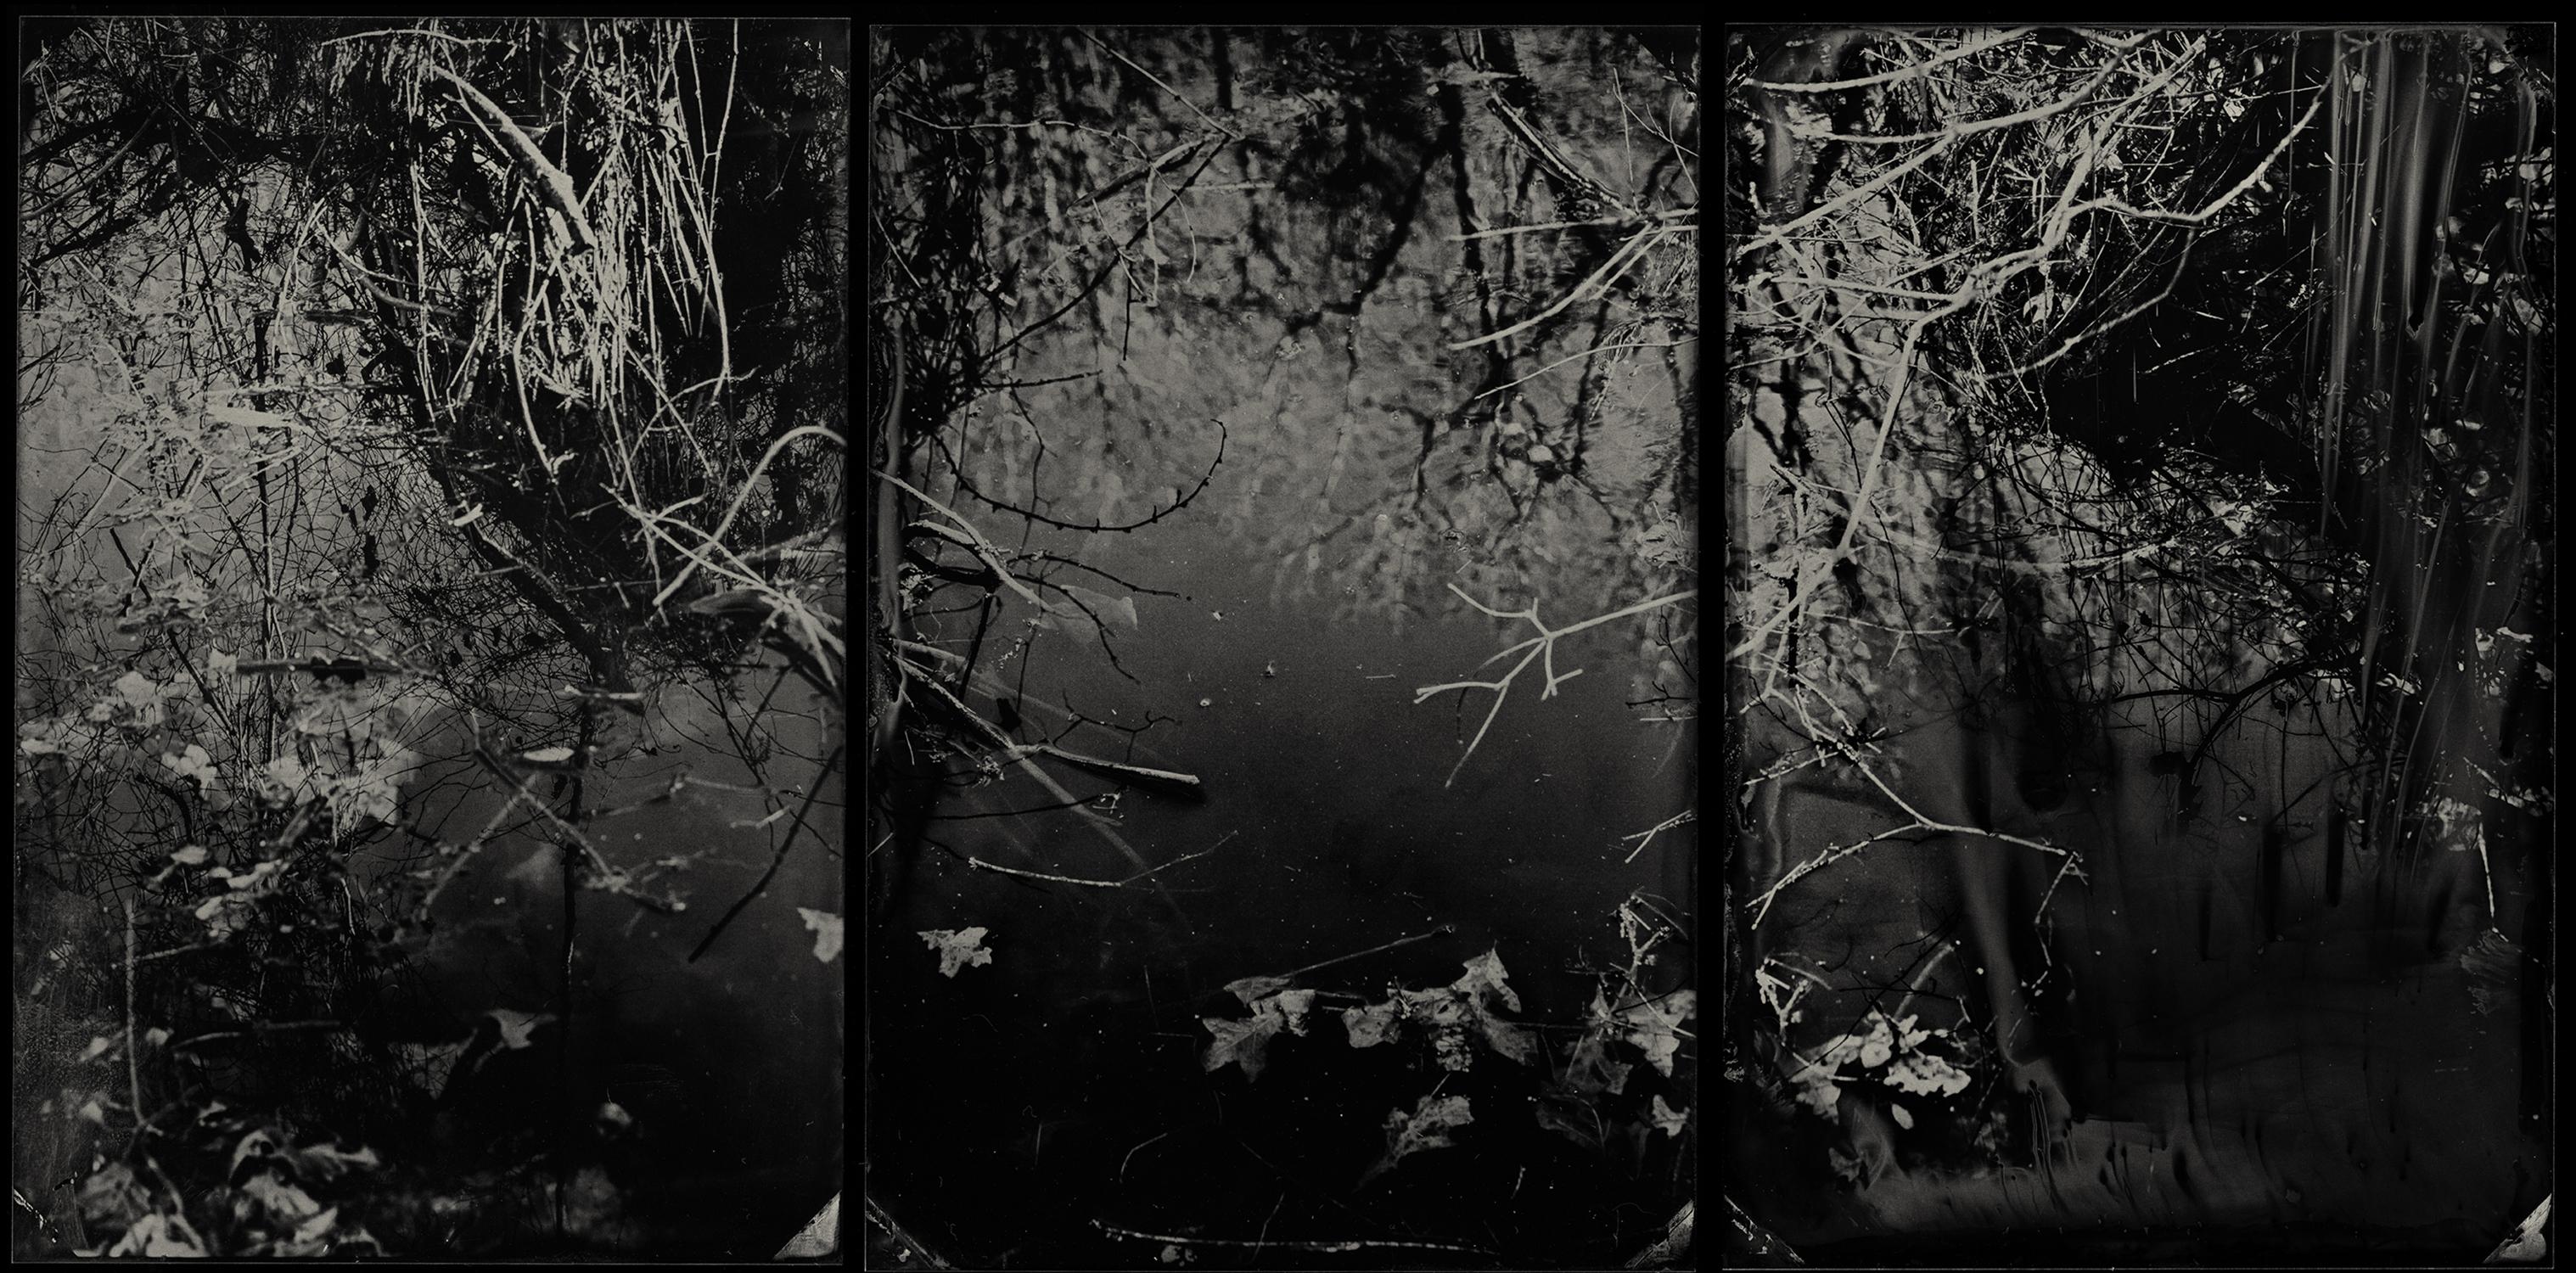 At Old Augusta Road - wet plate collodion - naturalism - landscape photography - Photograph by Cecilia Montalvo & Charlie McCullers